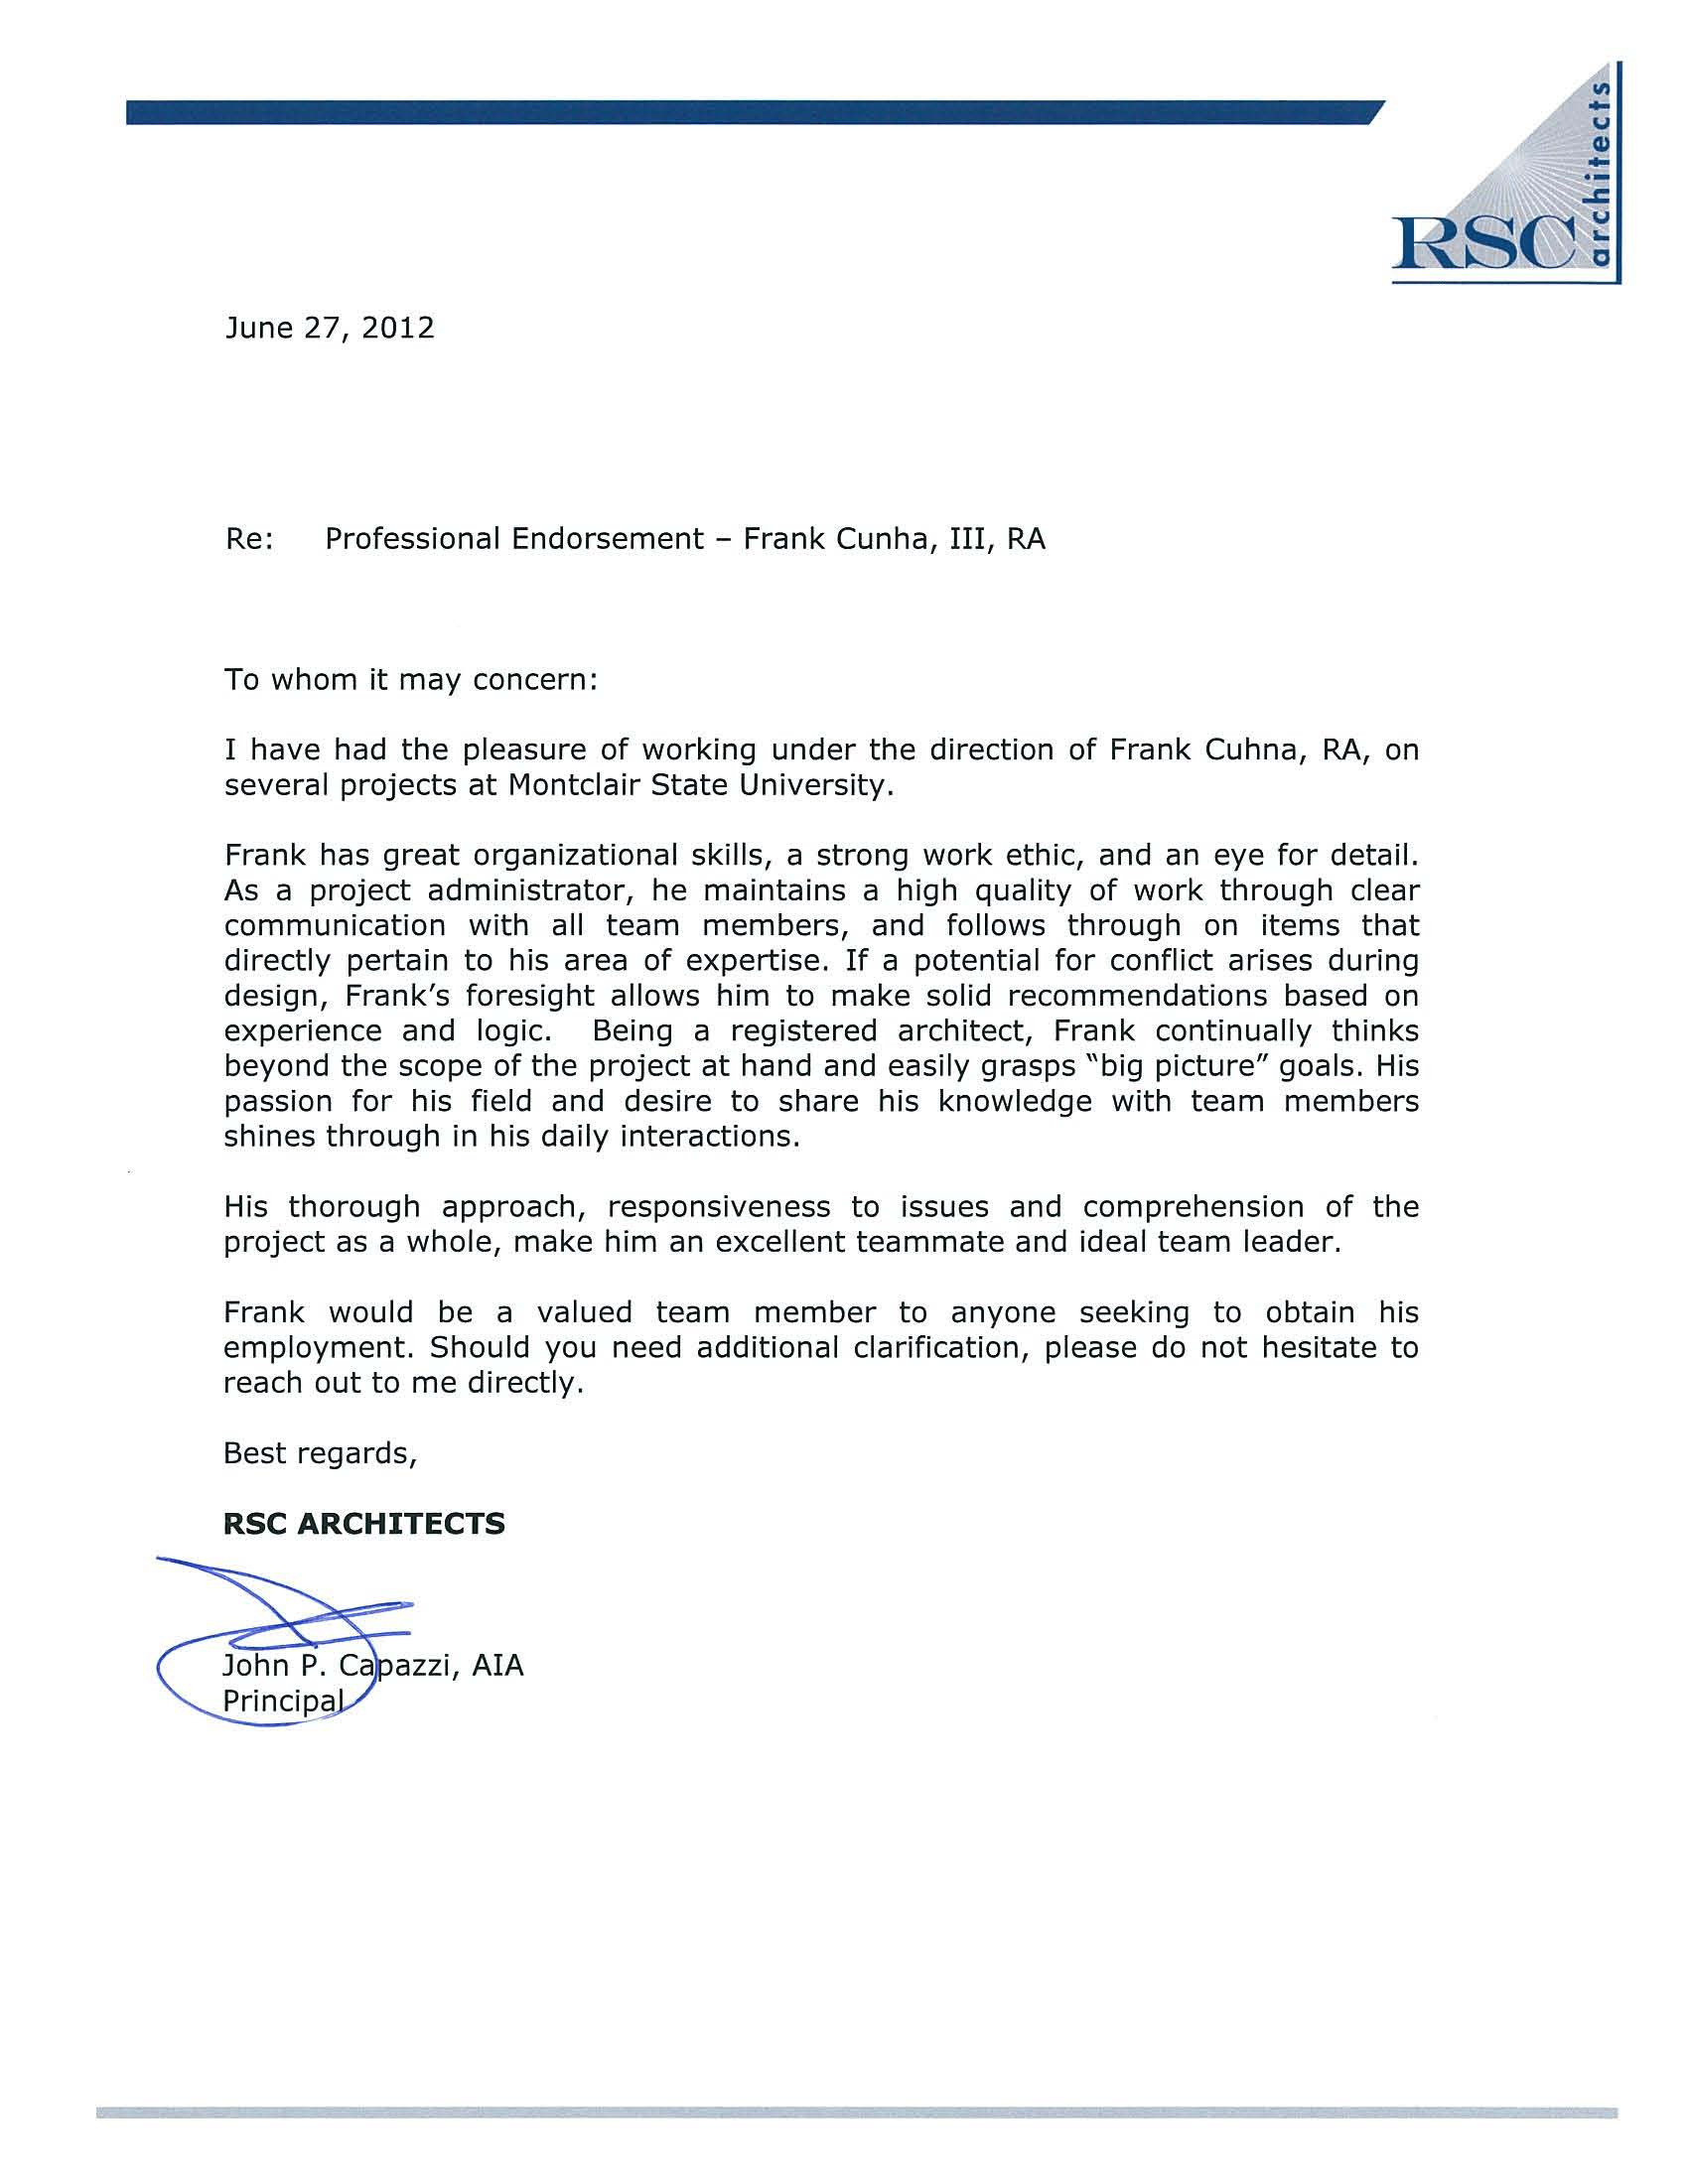 Recommendation Letter For Architect Employee Invazi throughout dimensions 1700 X 2200